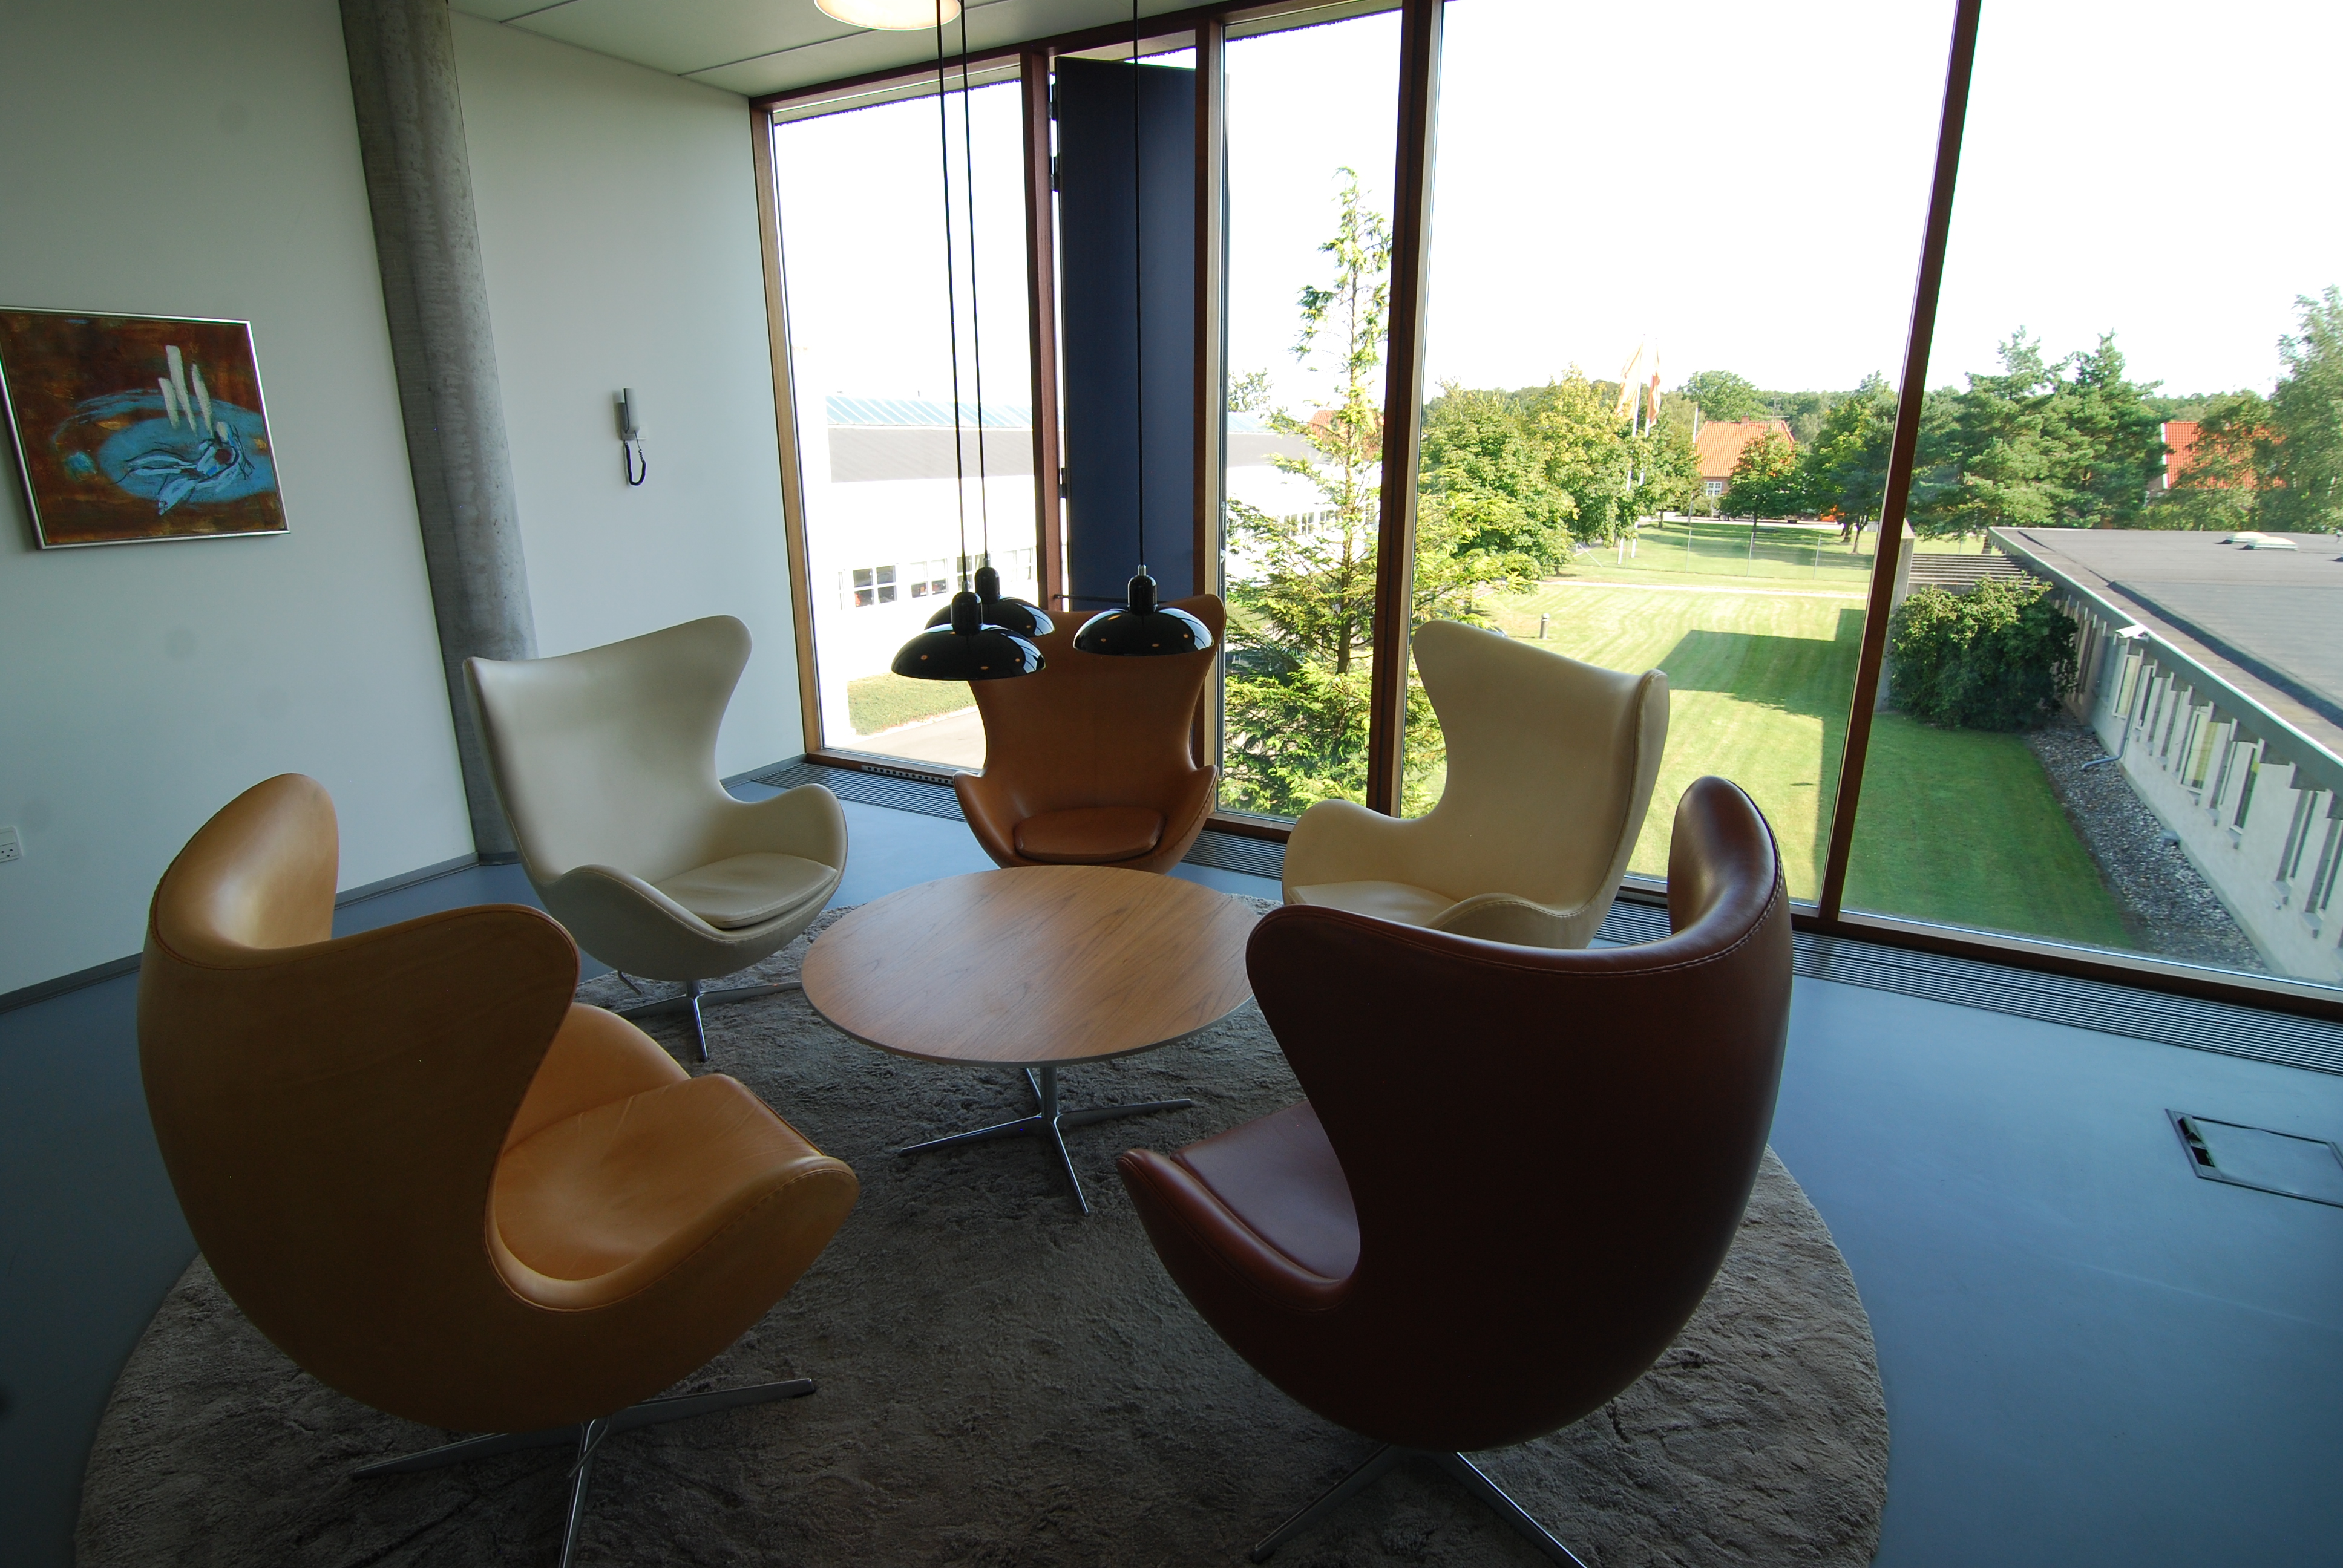 Meeting room at Fritz Hansen with Egg Chairs.